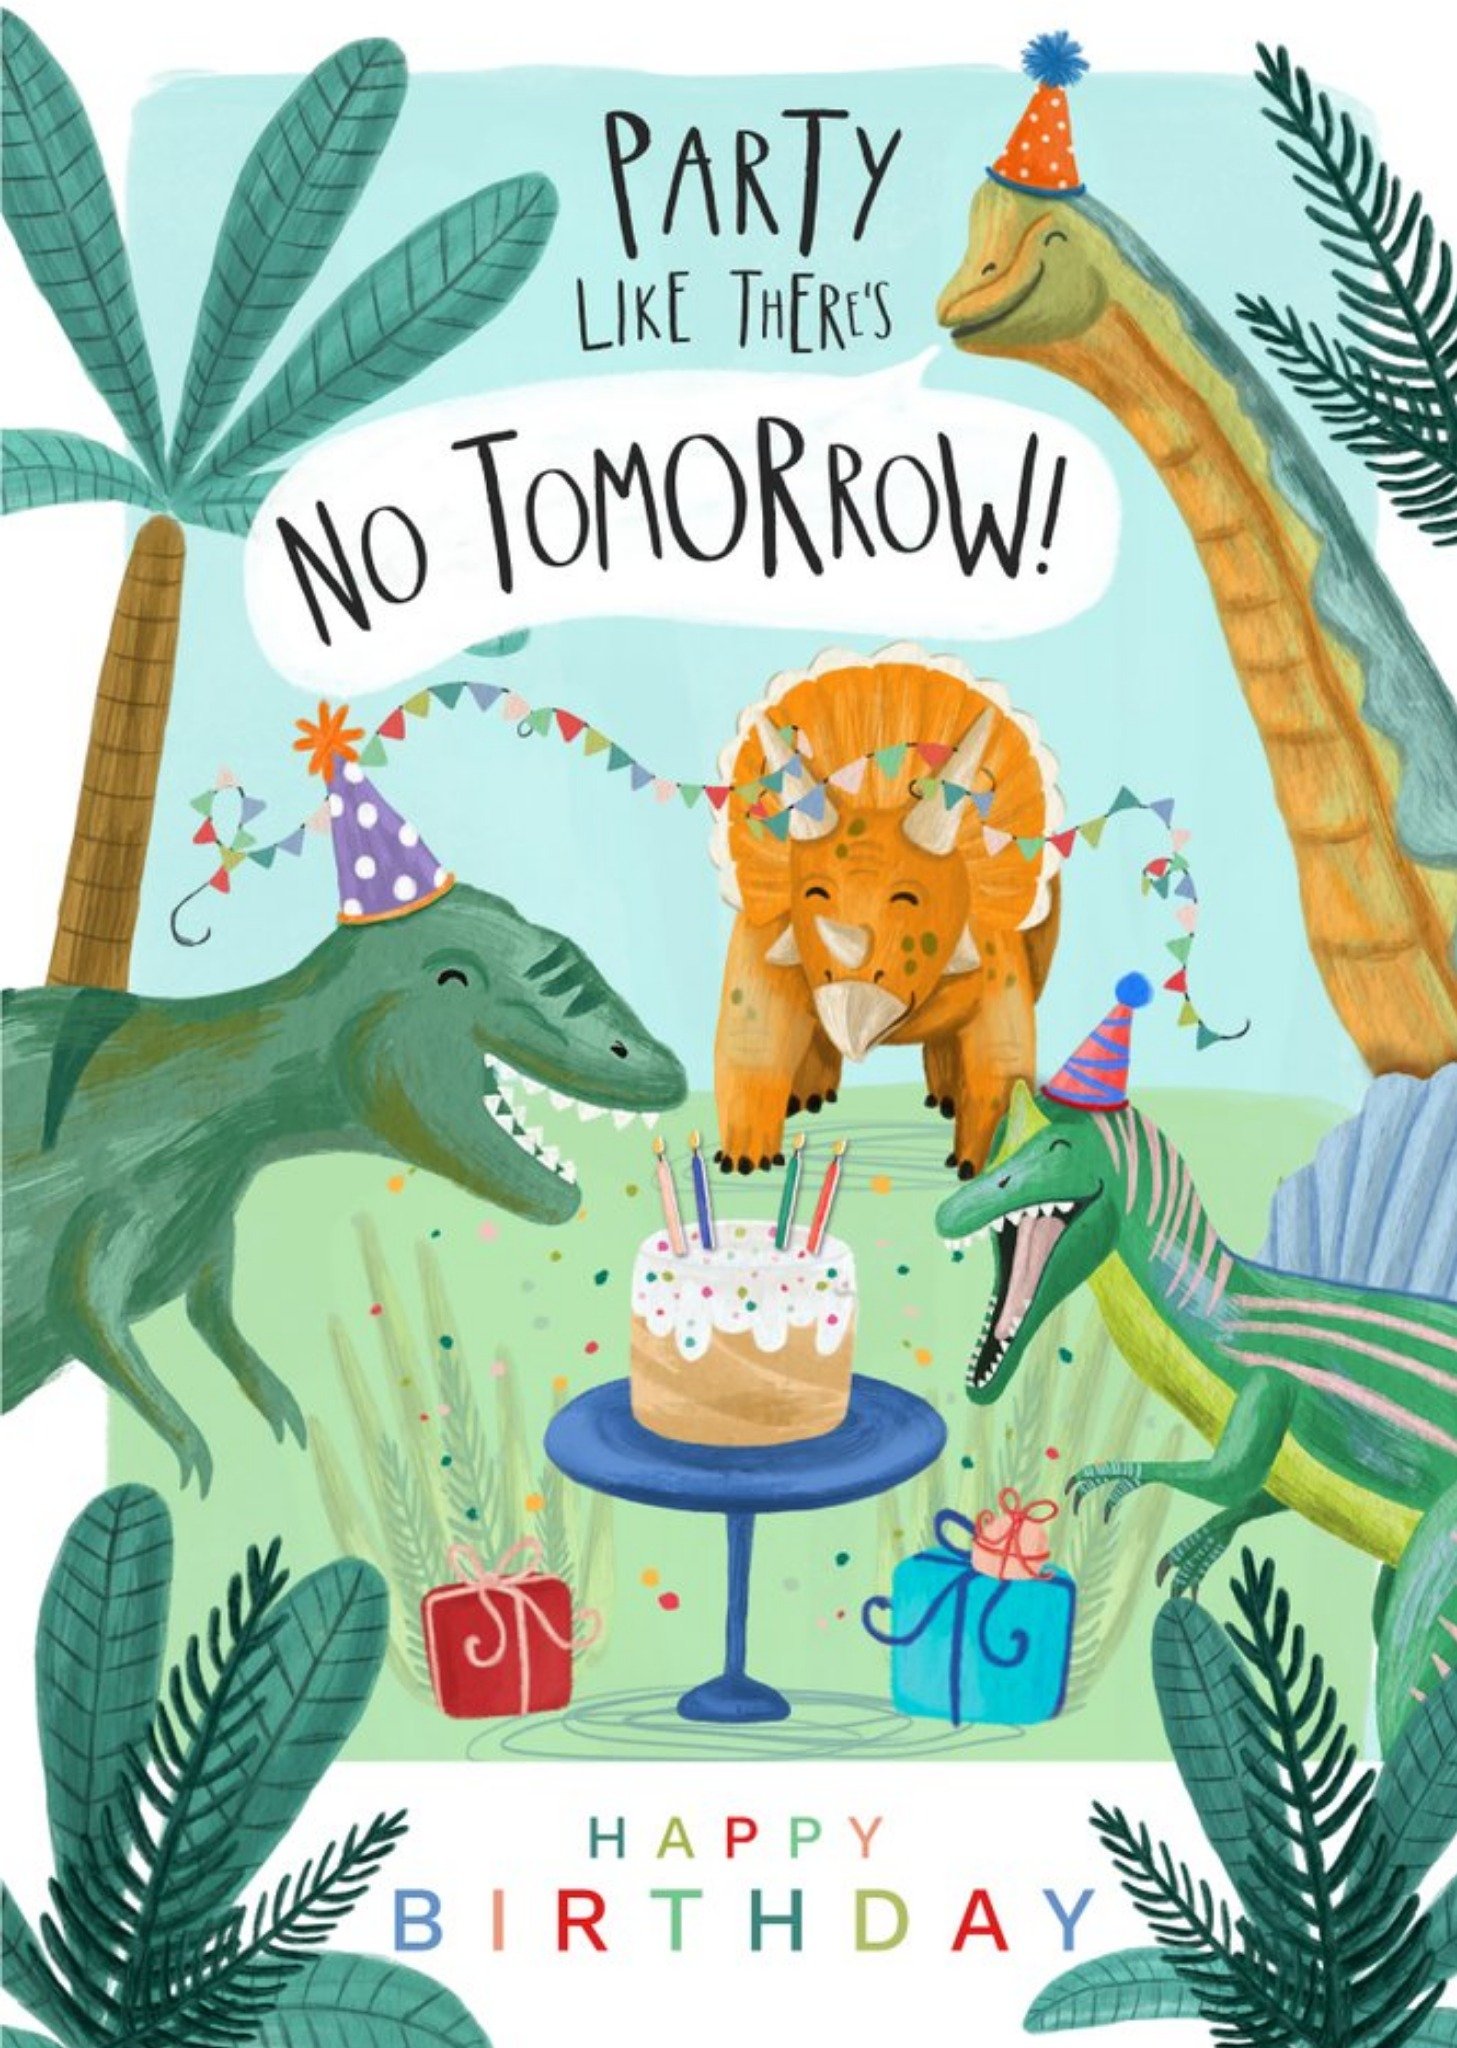 The Natural History Museum Natural History Museum Party Like There's No Tomorrow Birthday Card Ecard